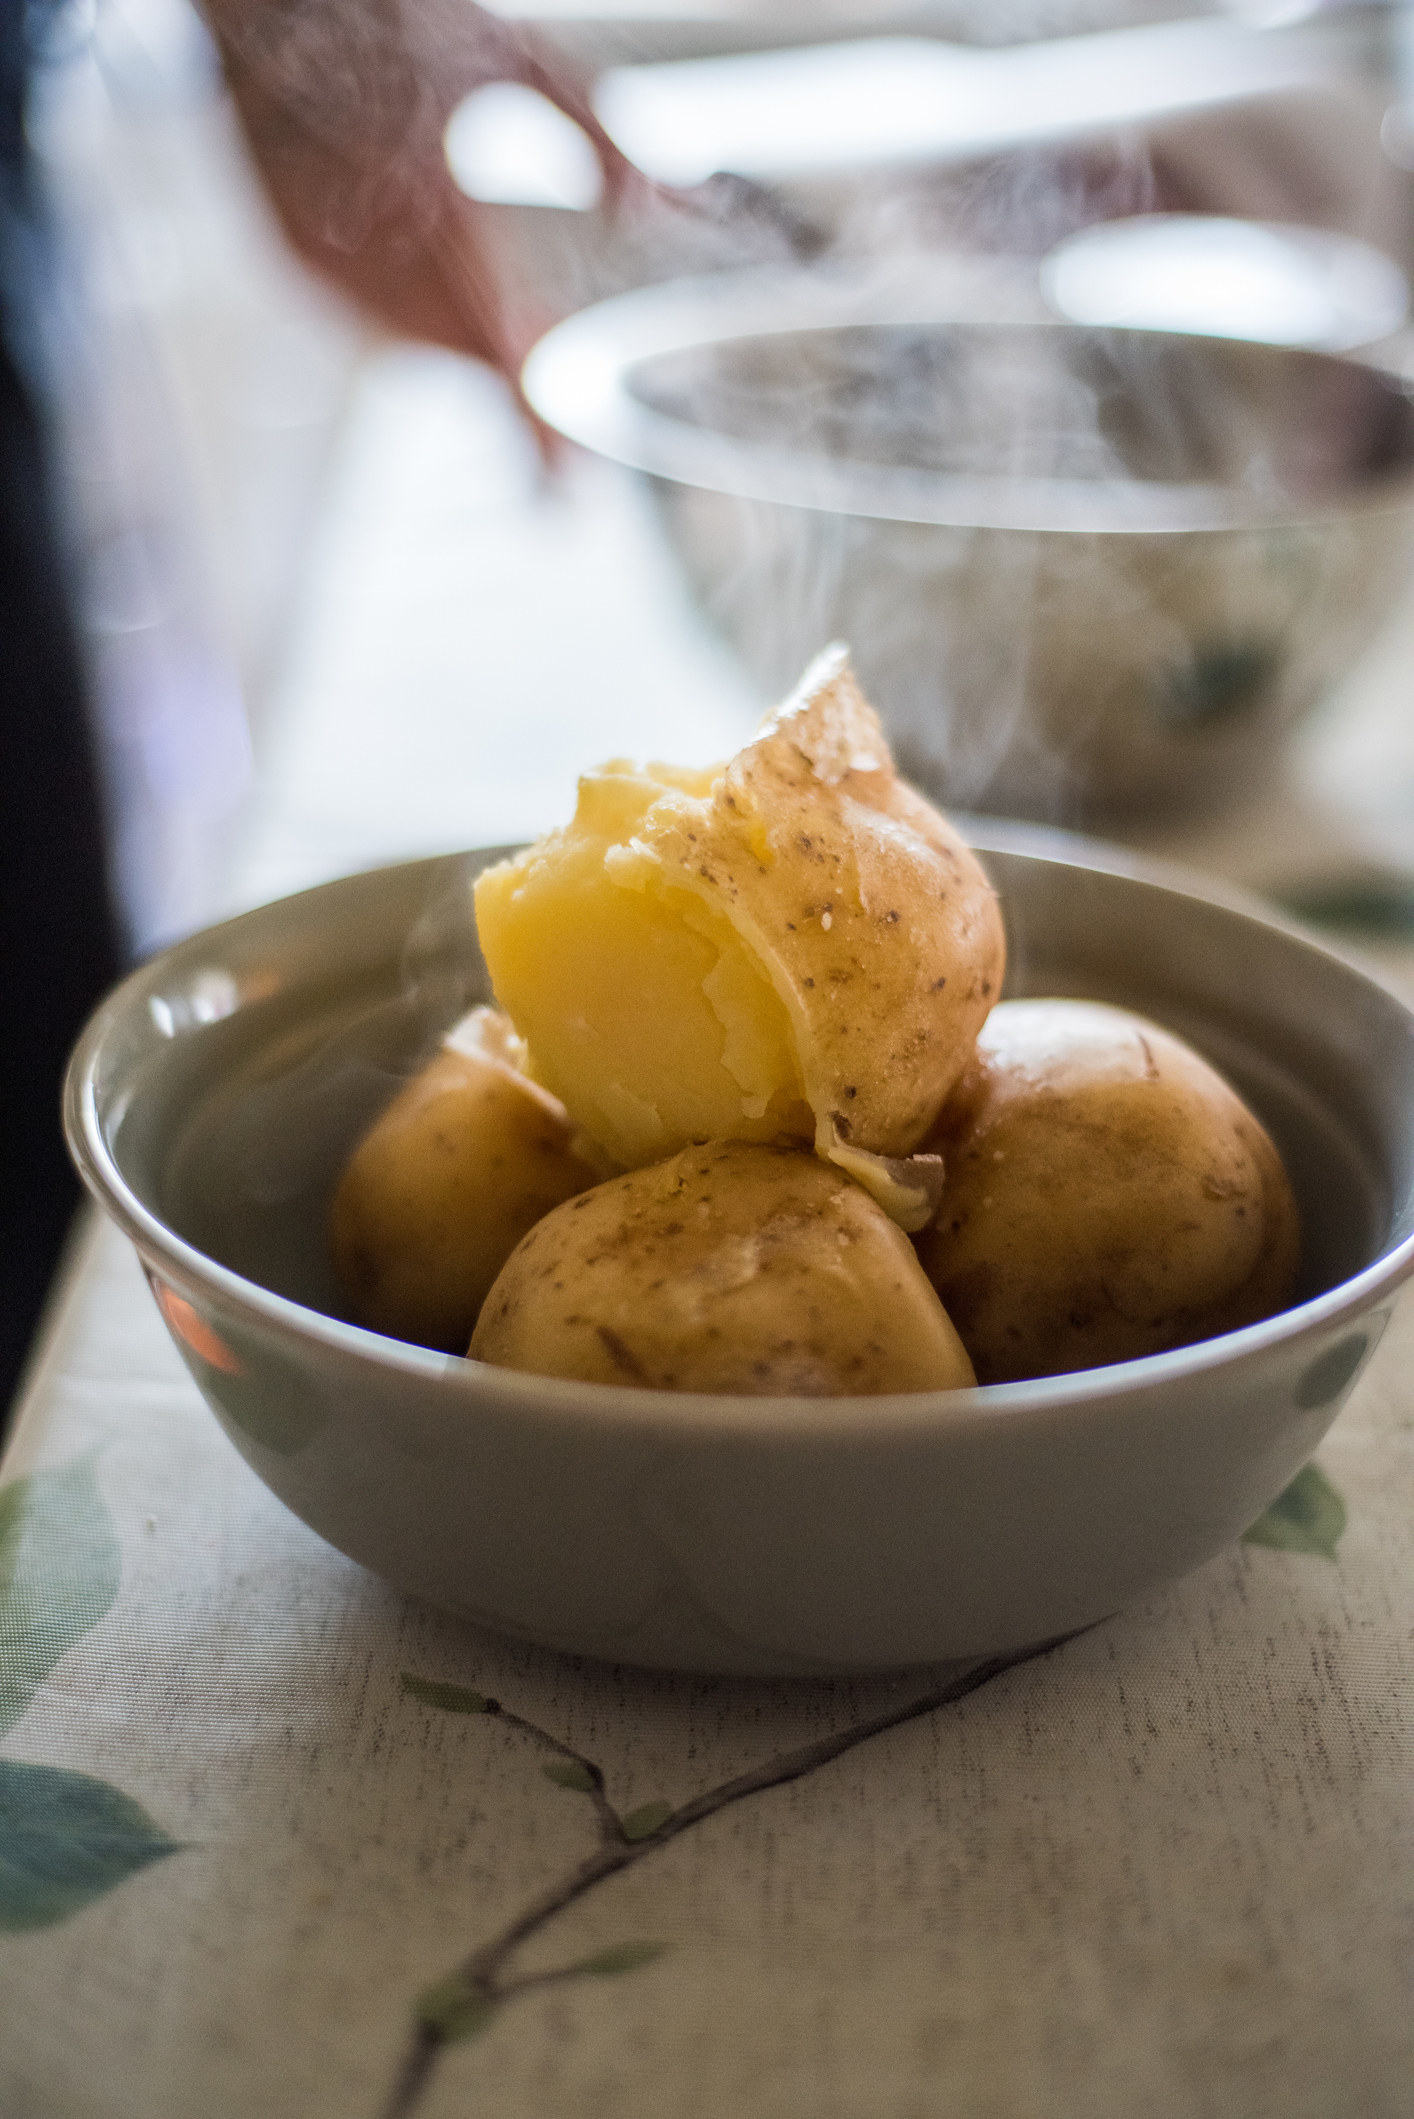 Boiled potatoes in a bowl